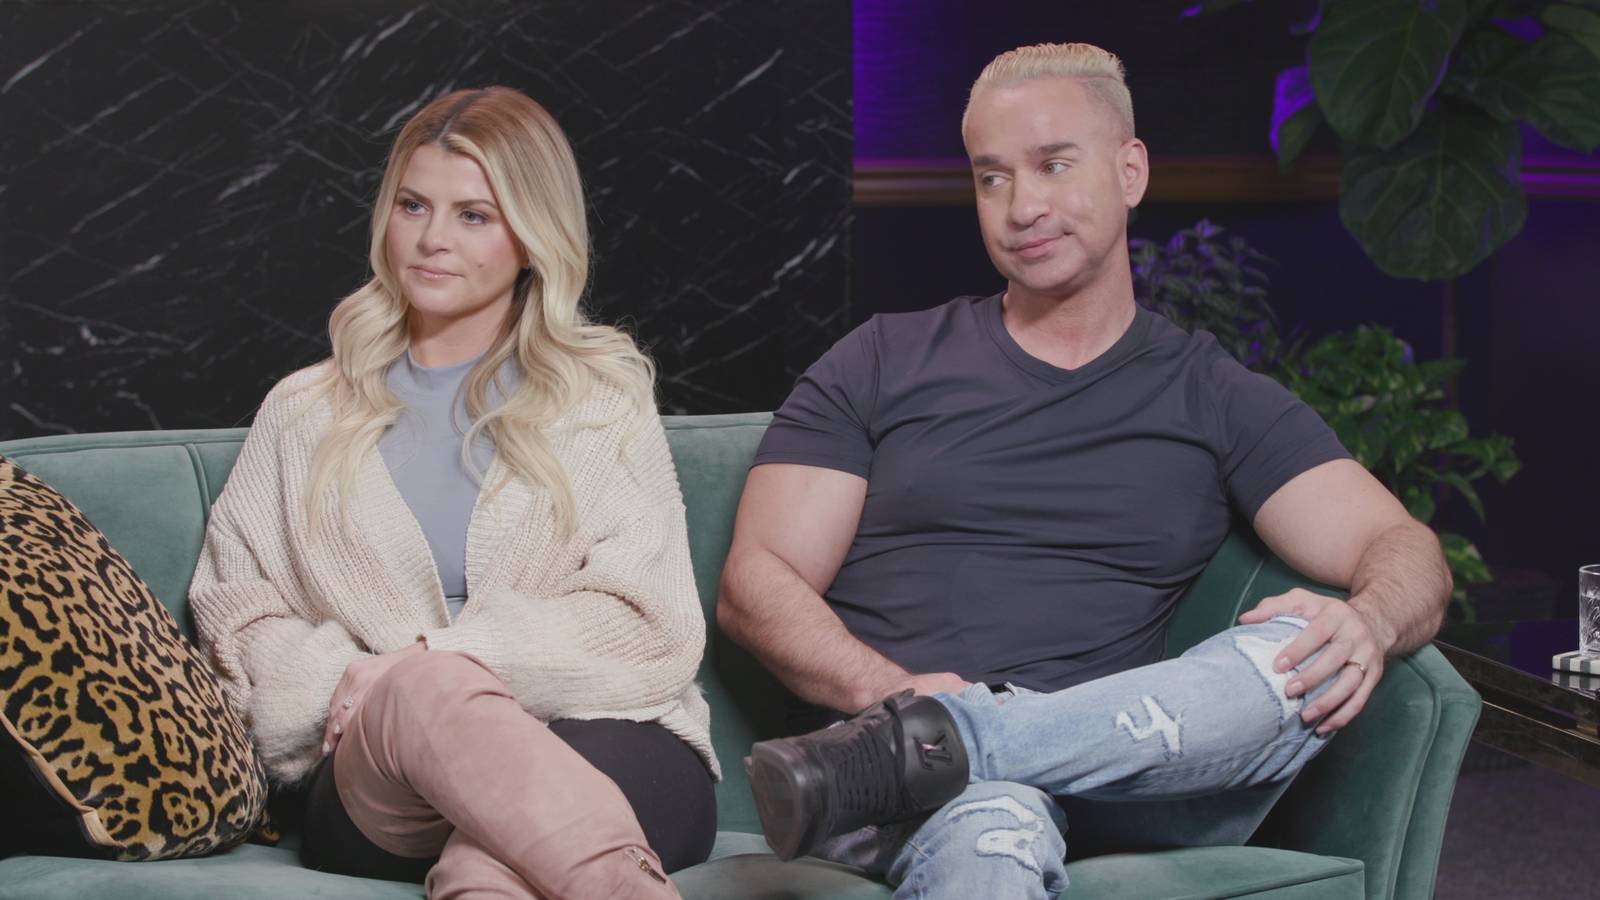 'Jersey Shore: Family Vacation' stars Lauren and Mike 'The Situation' Sorrentino